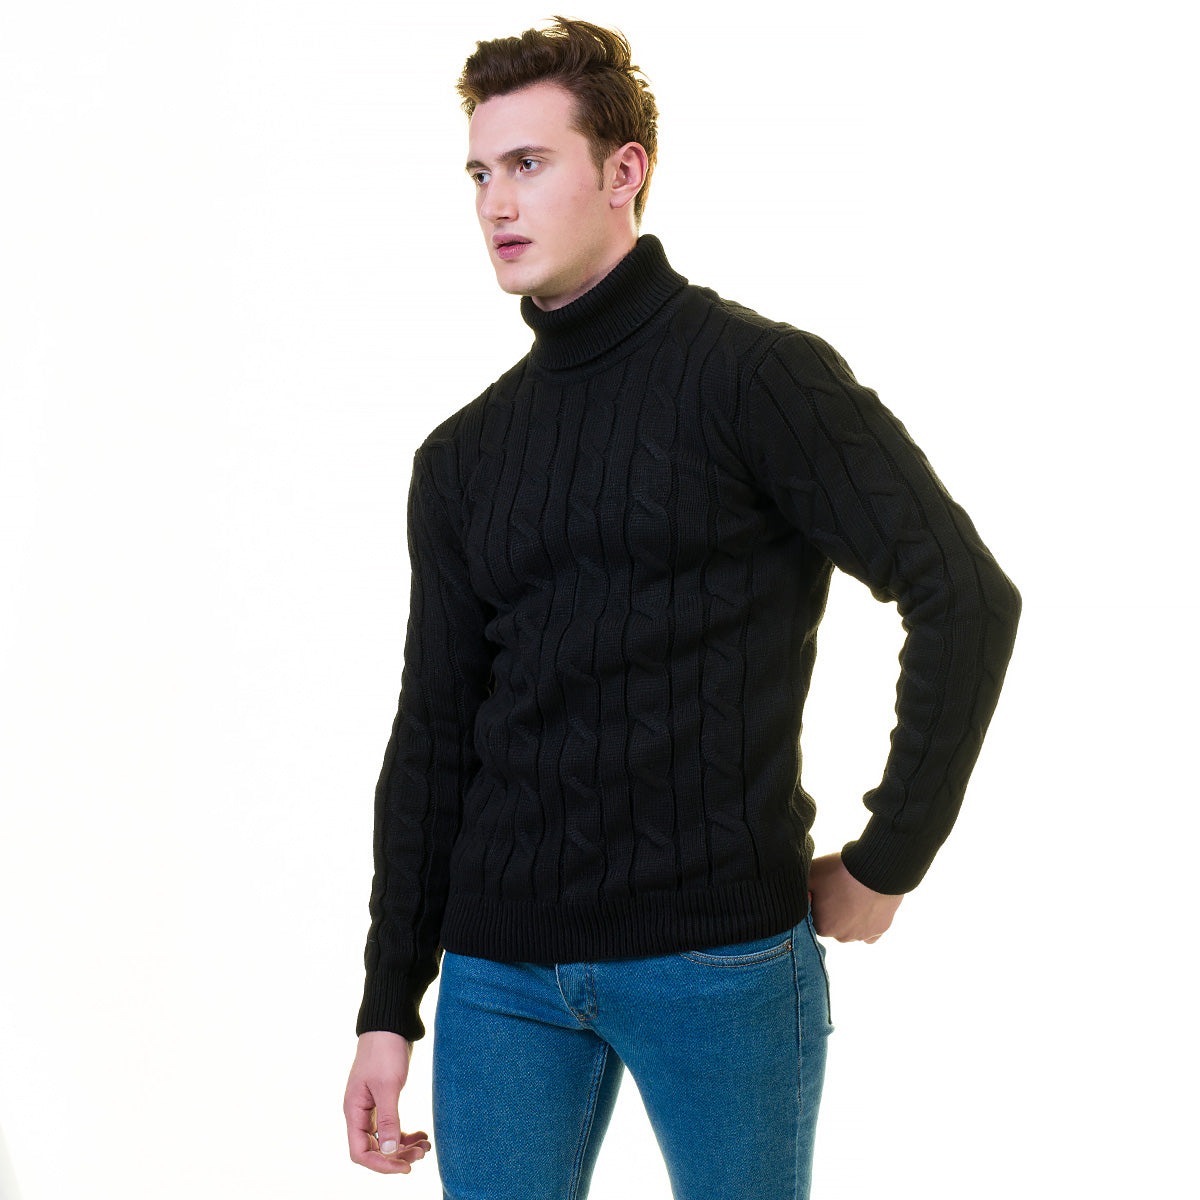 Black European Wool Luxury Zippered With Sweater Jacket Warm Winter Tailor Fit